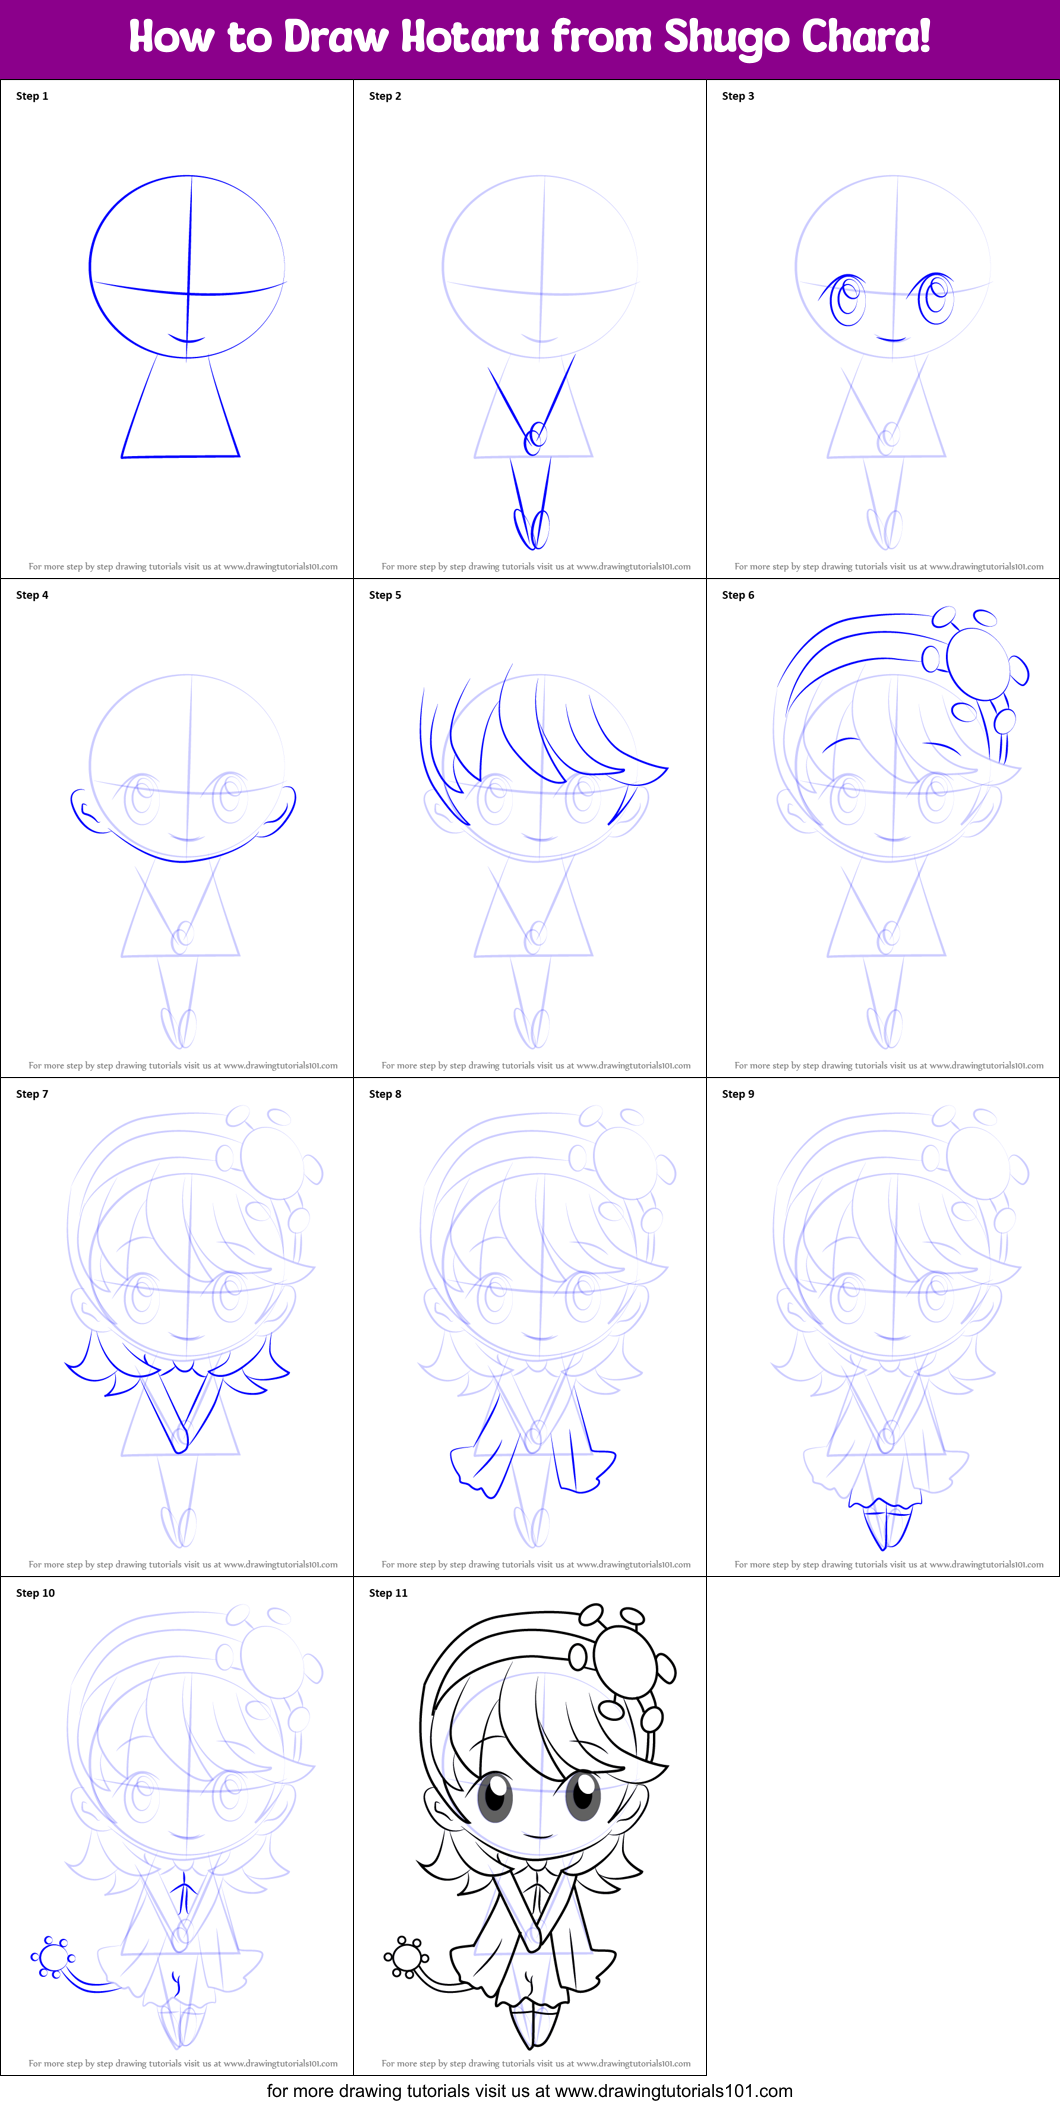 How to Draw Hotaru from Shugo Chara! printable step by step drawing